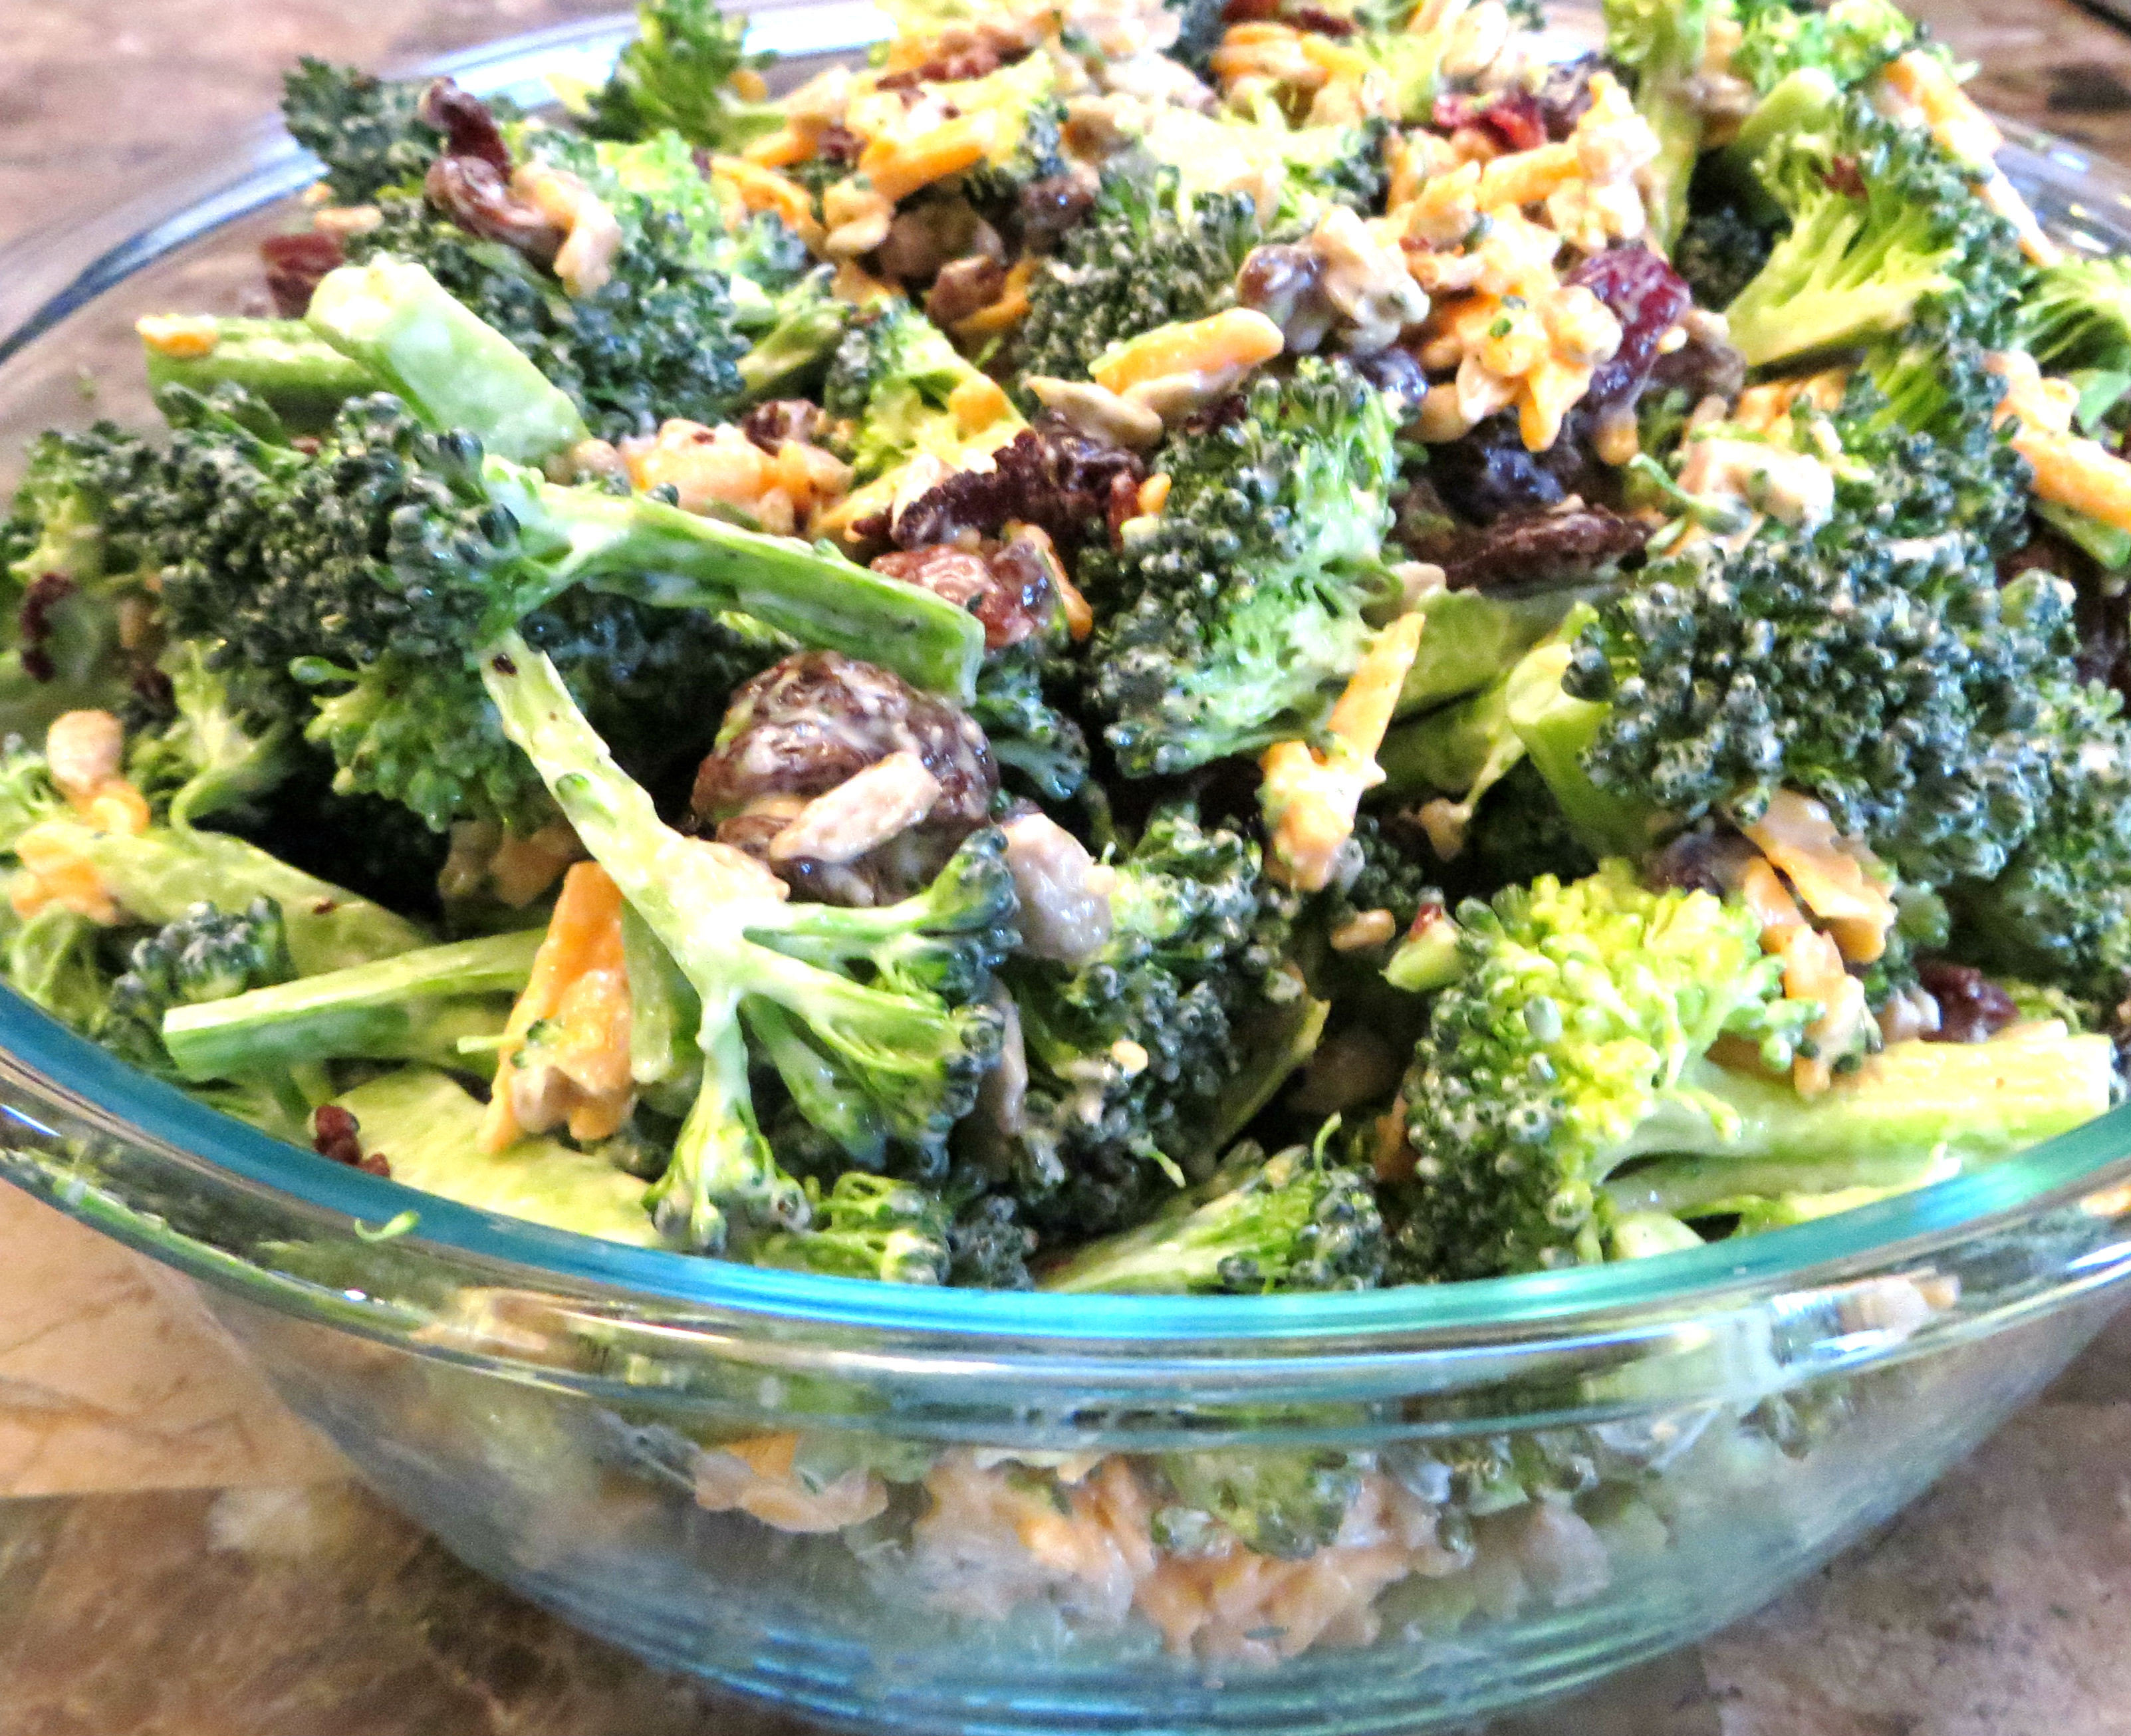 Broccoli Salad With Bacon
 Broccoli and Kale Salad with Bacon and Cranberries